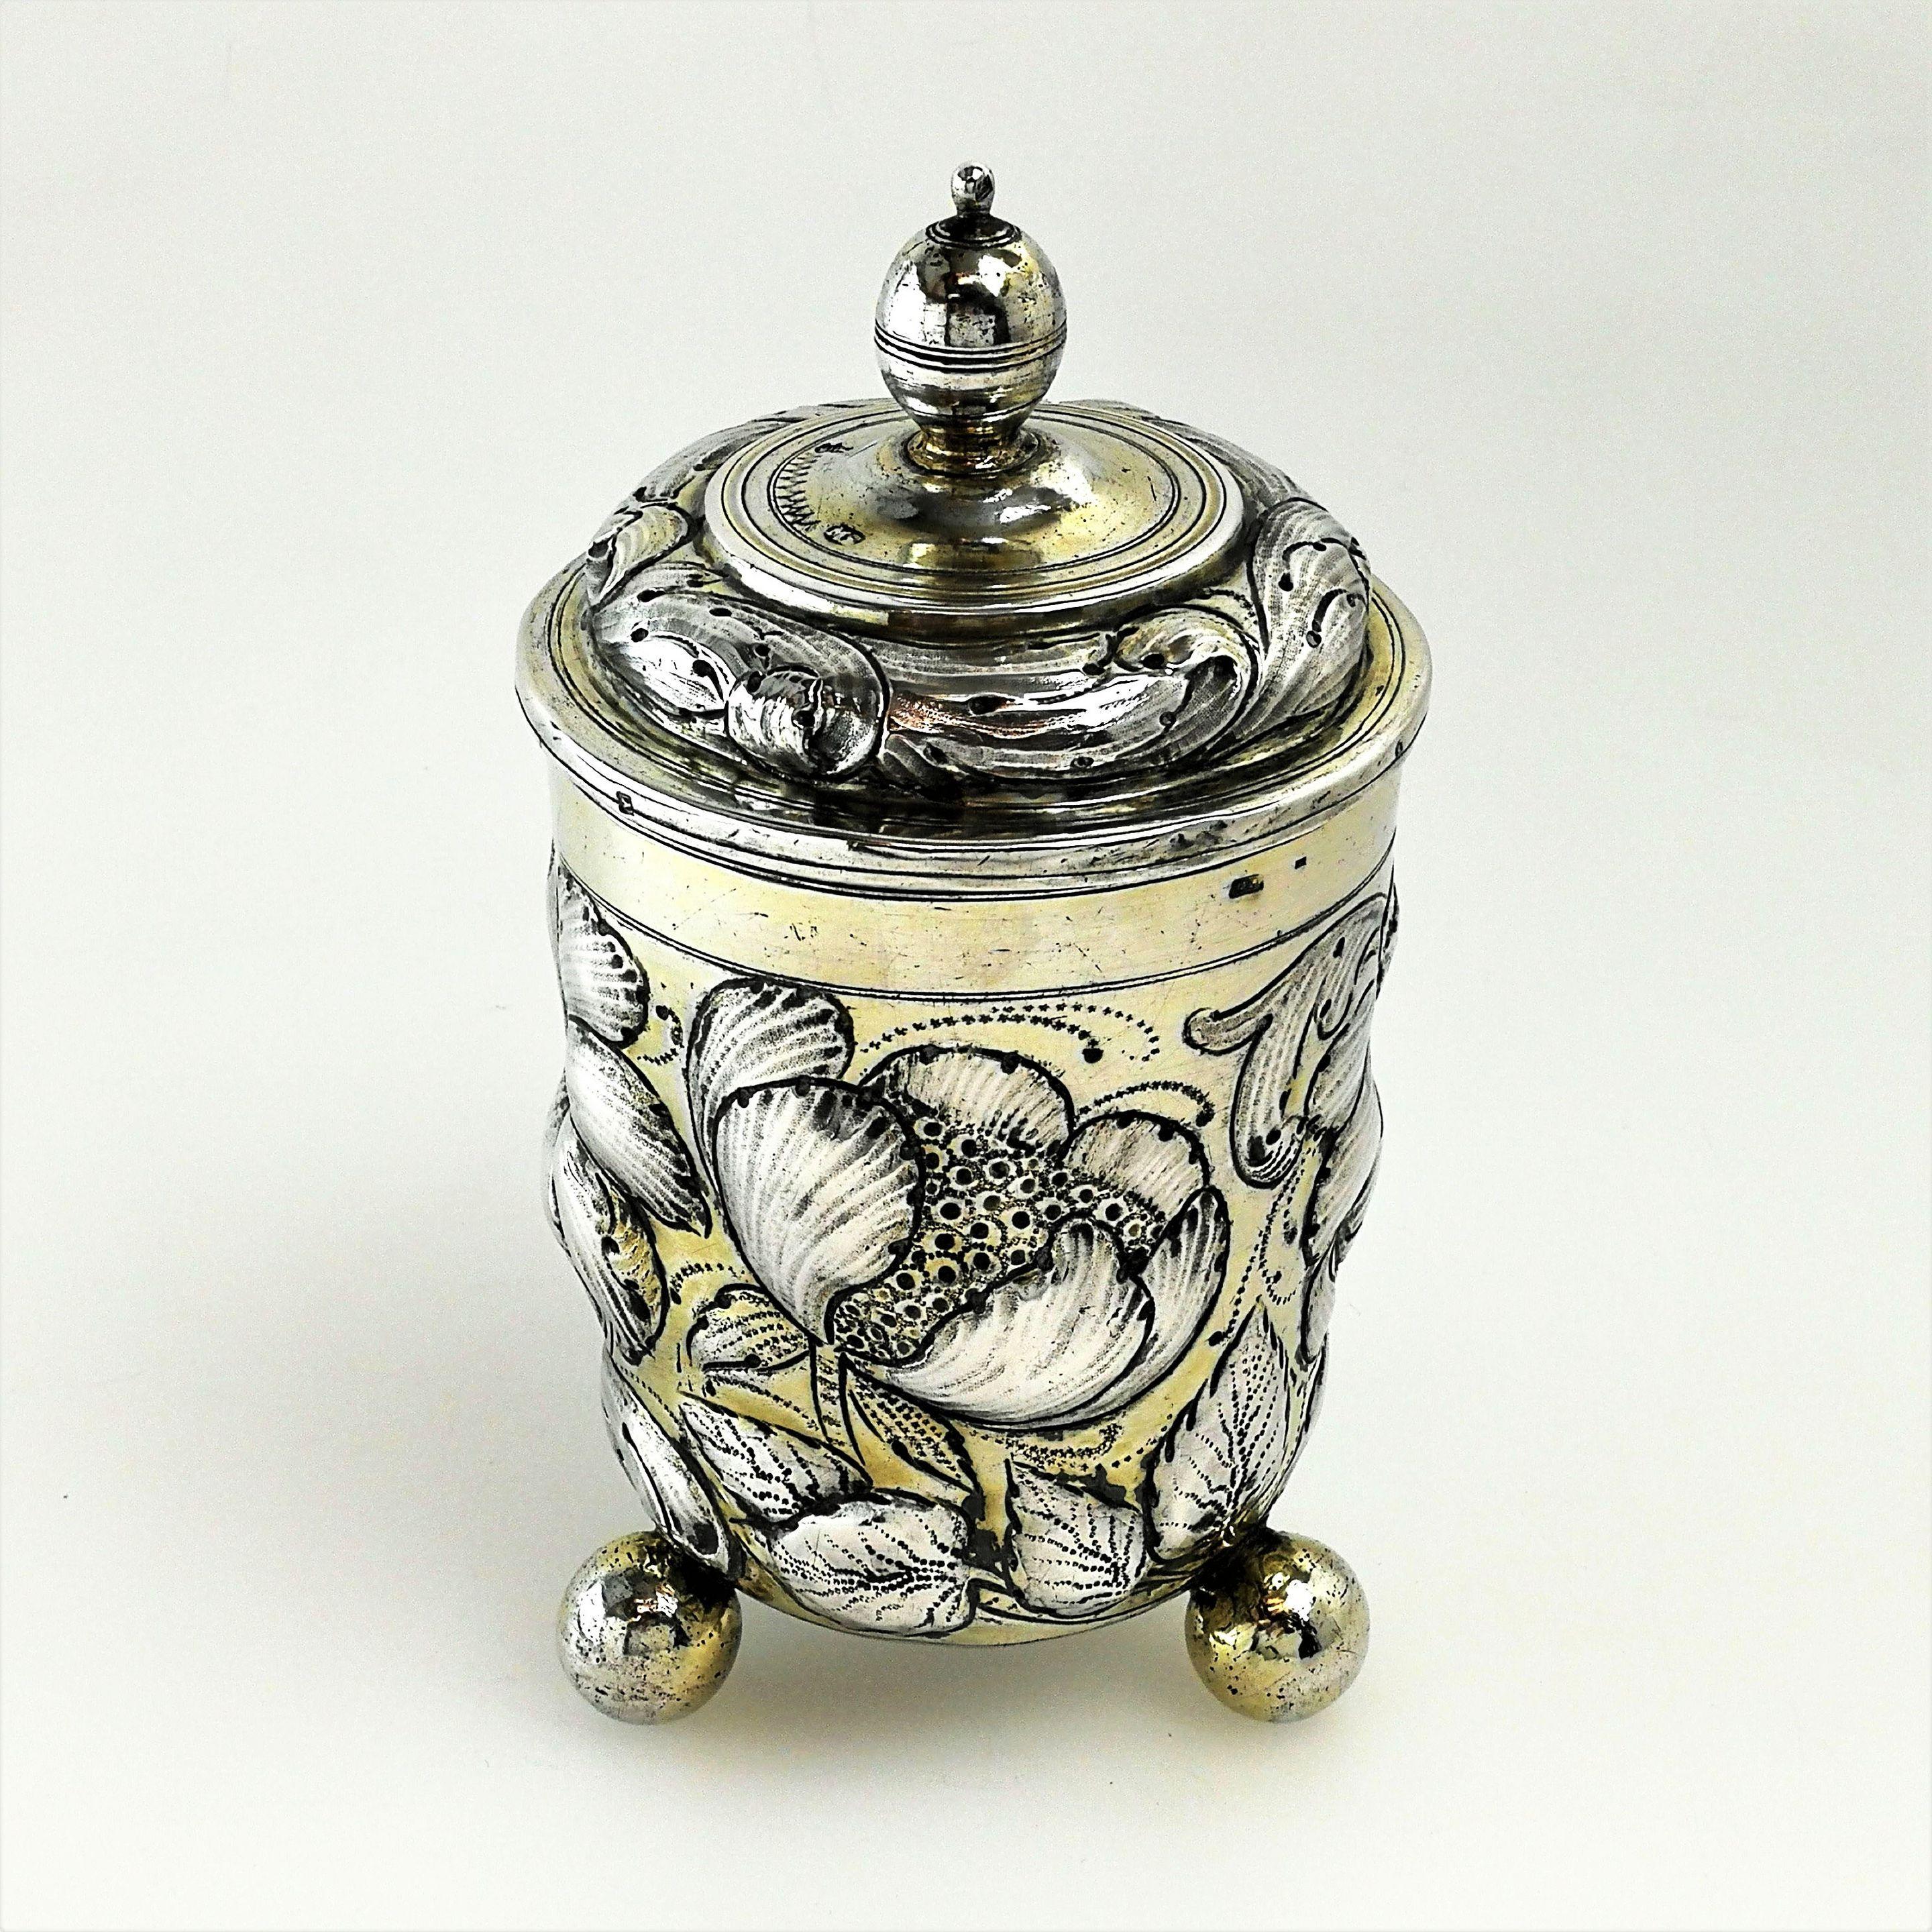 A gorgeous antique 17th century German silver cup and cover / lidded beaker. This Cup stands on three ball feet and is embellished with a rich chased floral design. The Cup jas a chased fitted lid. Both the beaker & lid are decorated with pale